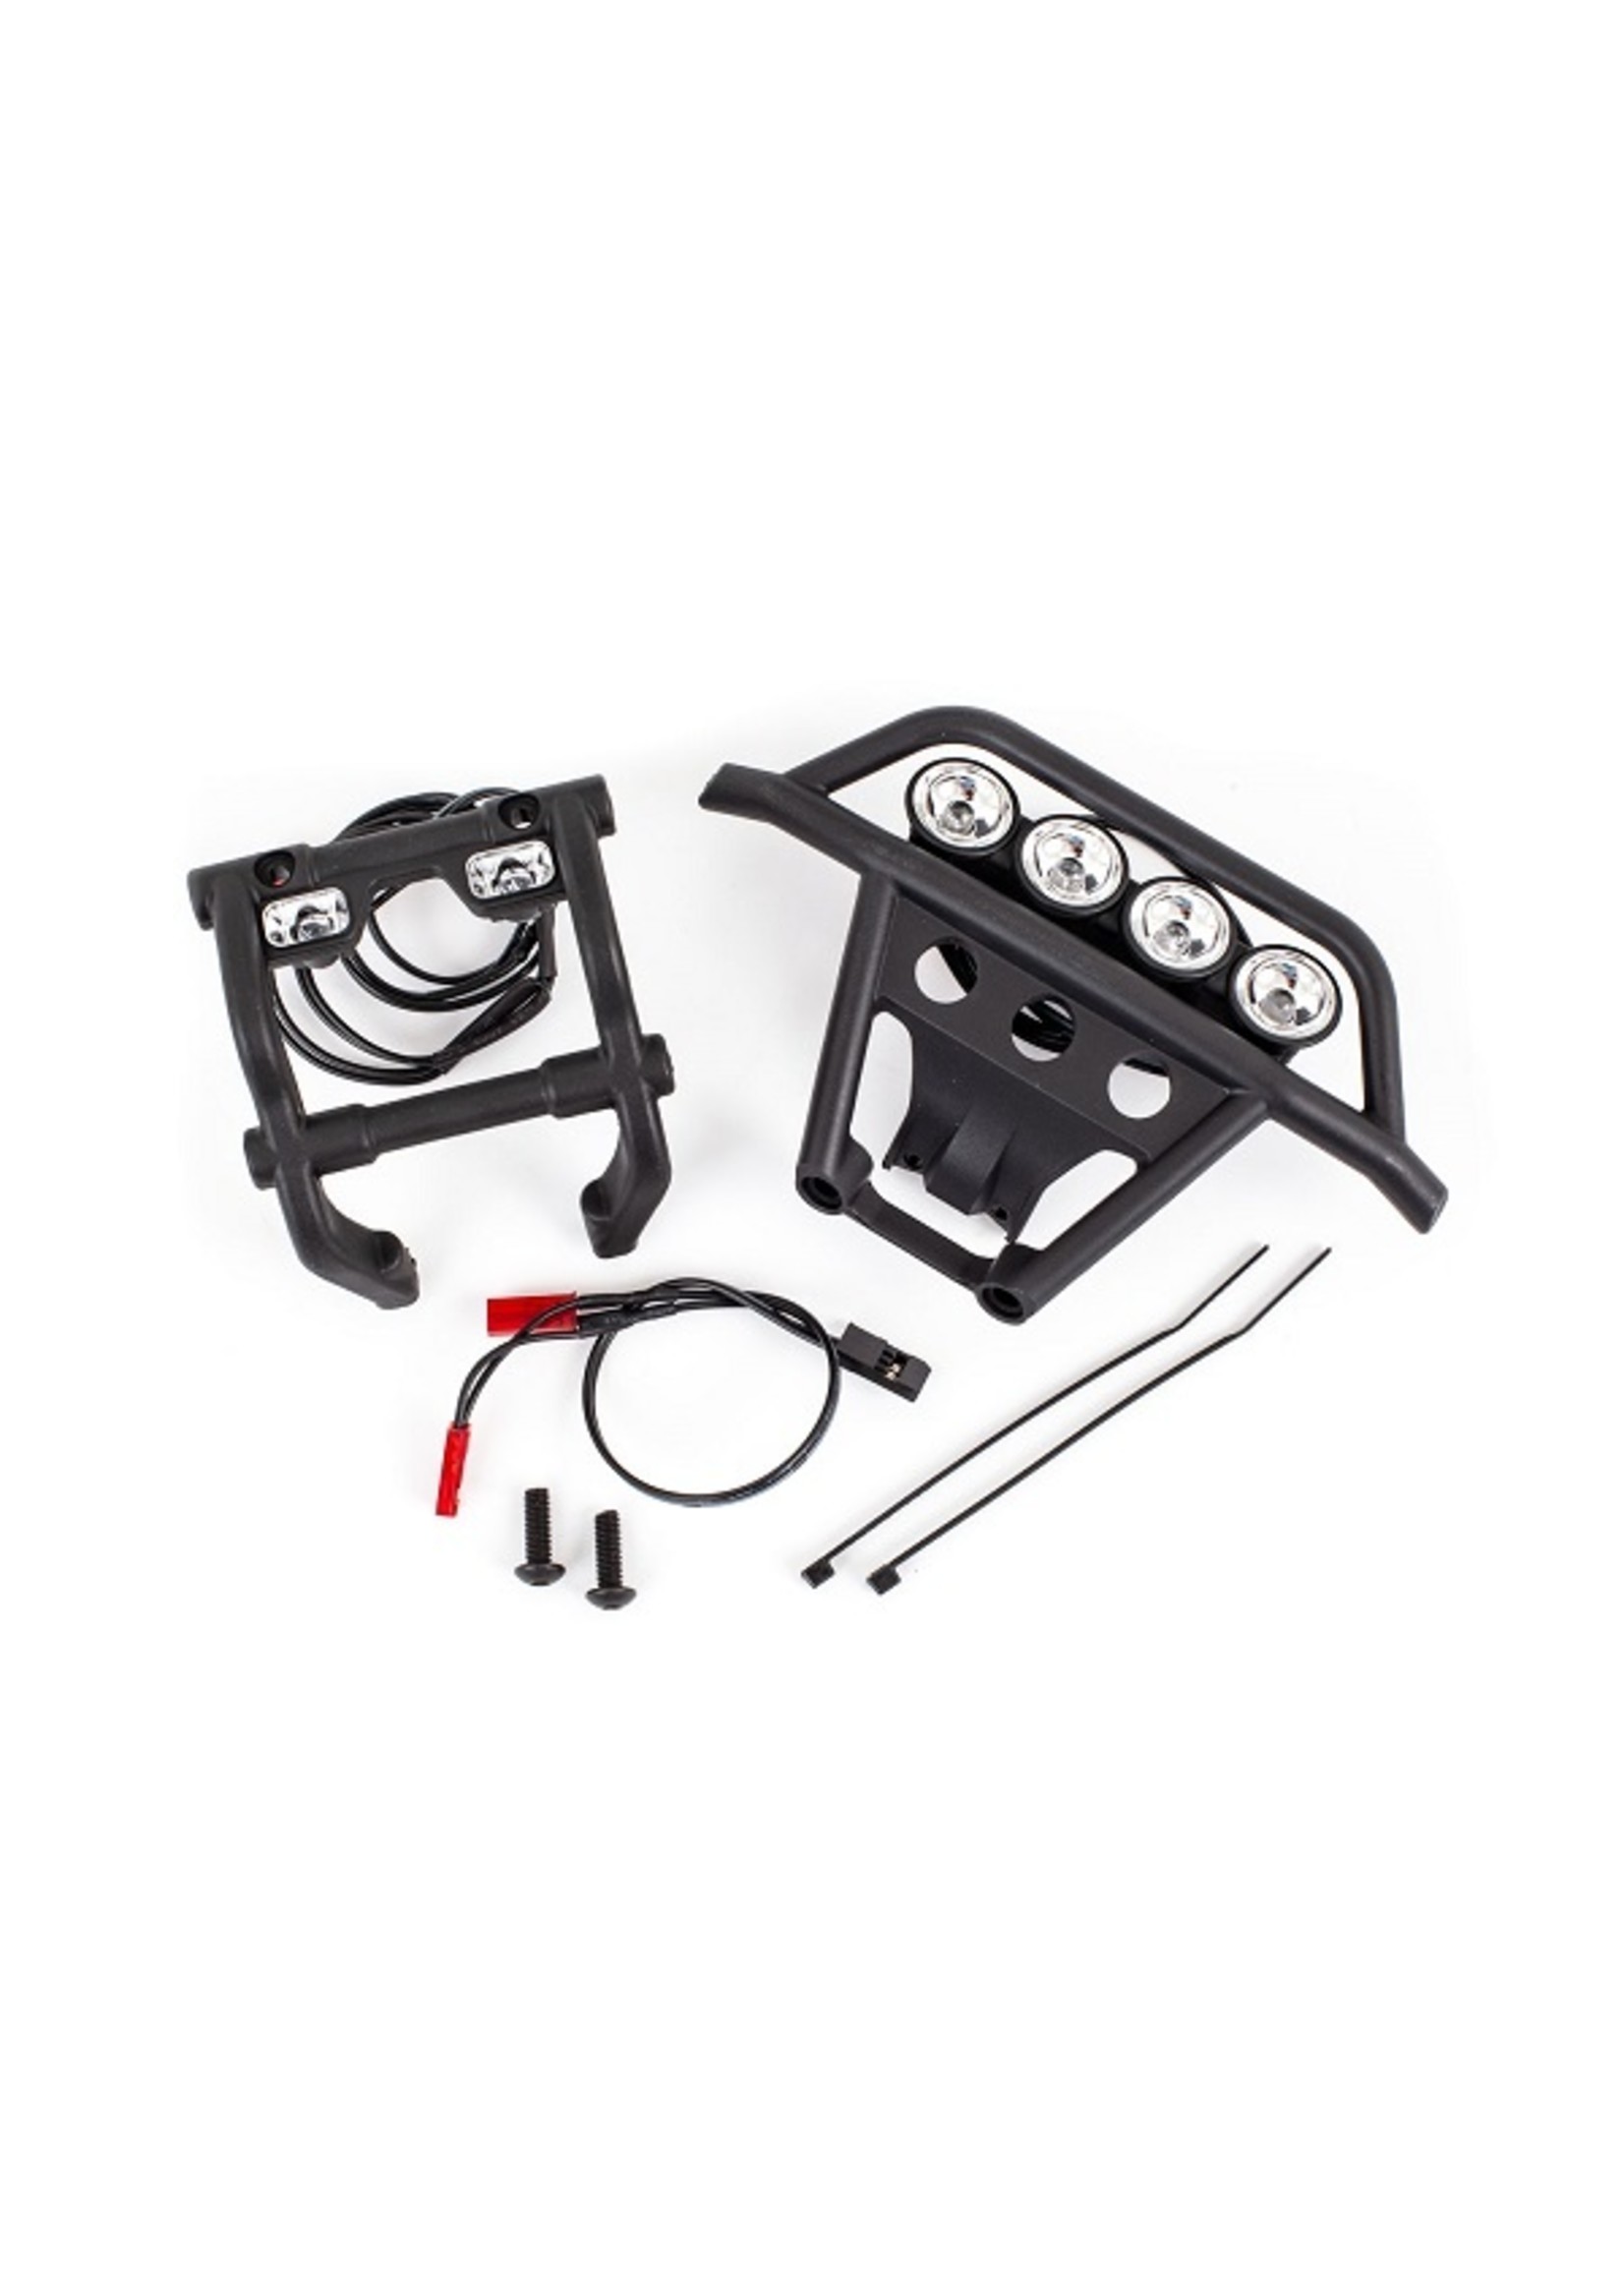 Traxxas 6794 - Complete LED Kit, F/R 4WD Stampede